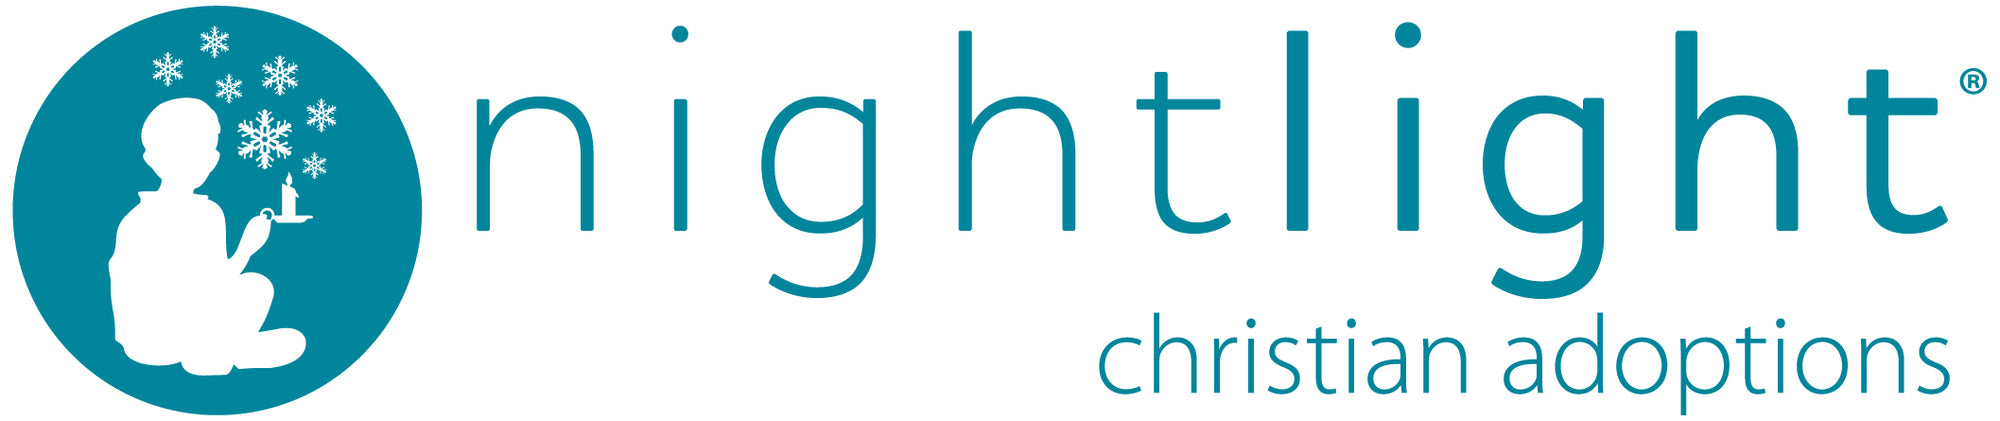 JOIN US ON APRIL 25 AND HELP NIGHTLIGHT CHRISTIAN ADOPTIONS!